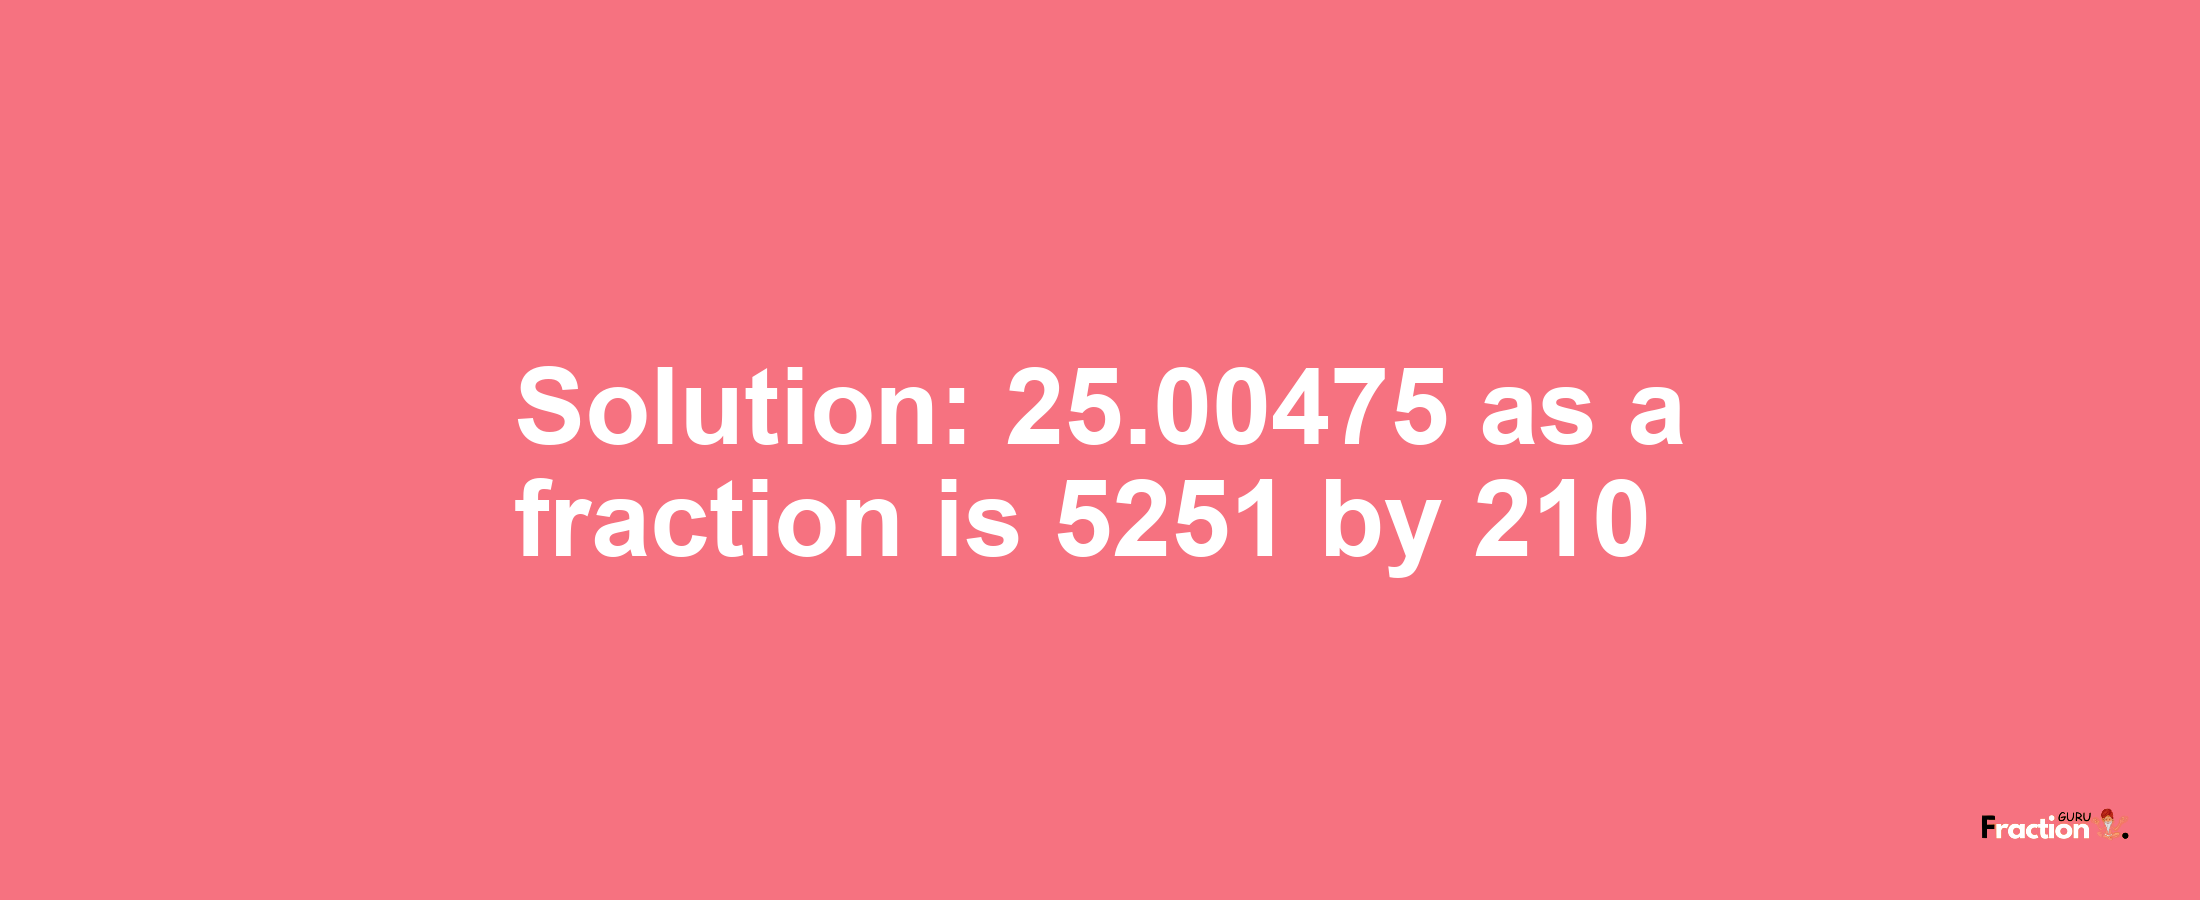 Solution:25.00475 as a fraction is 5251/210